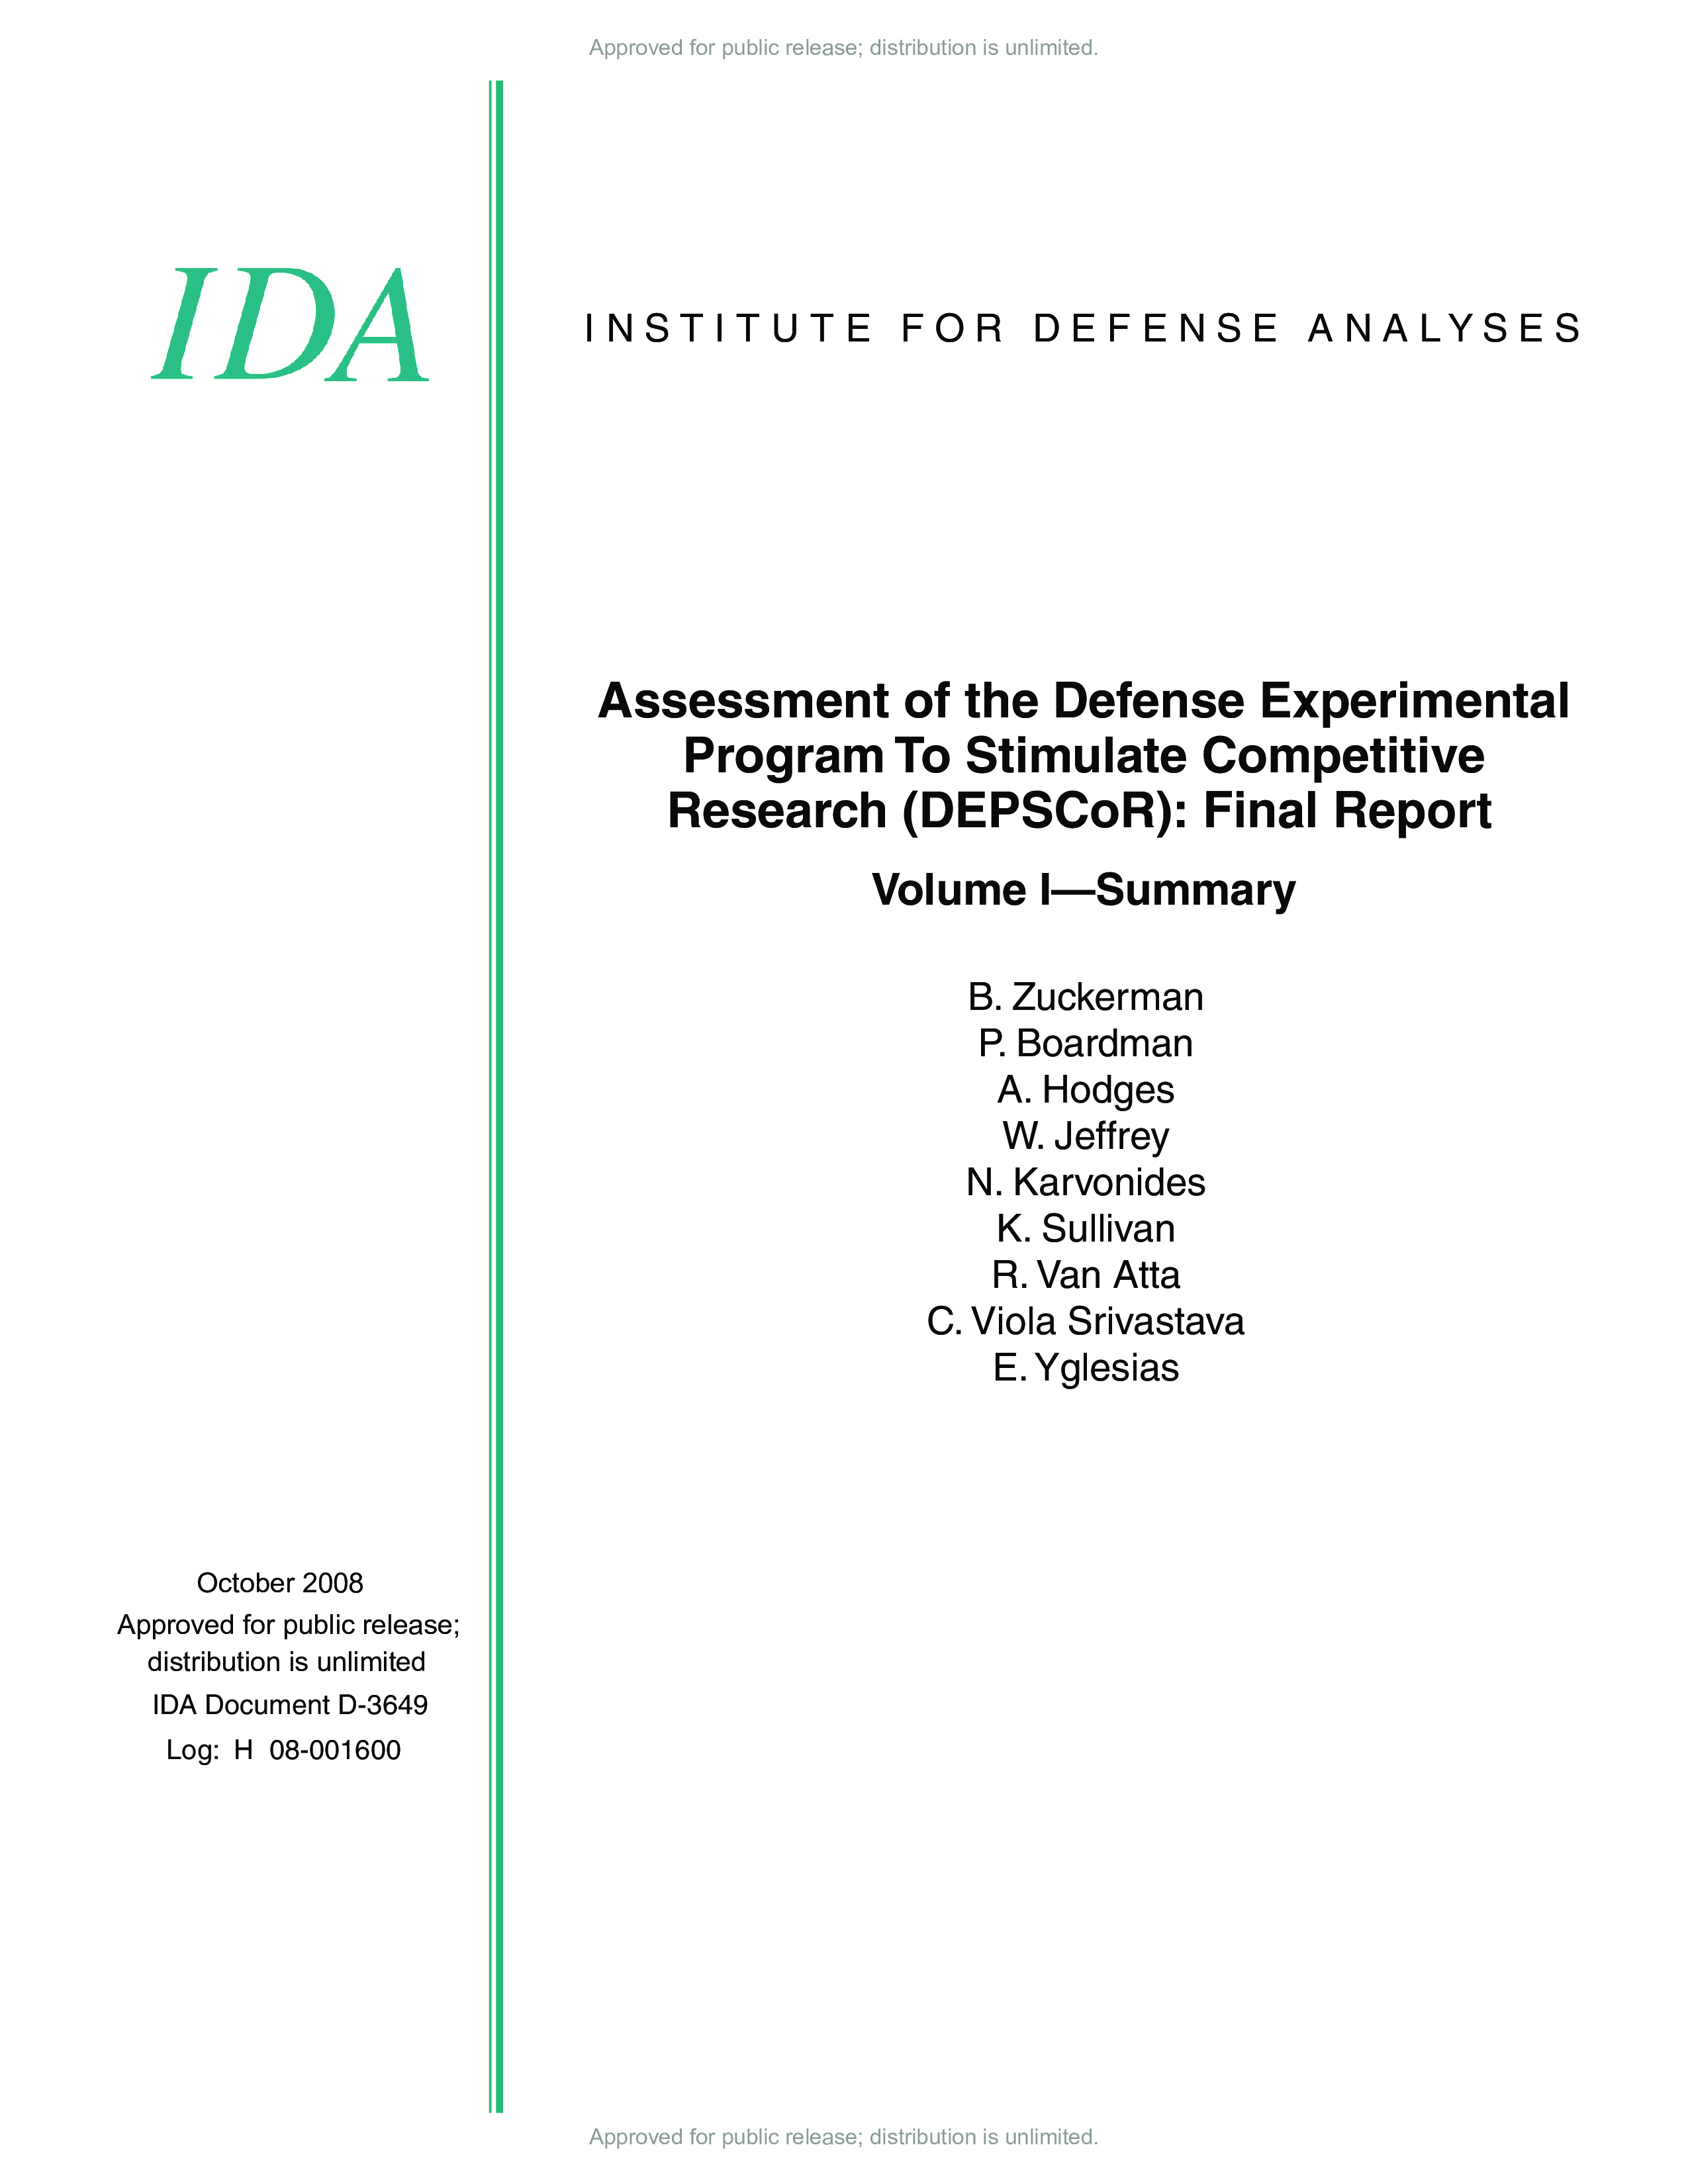 Assessment of the Defense Experimental Program to Stimulate Competitive Research DEPSCoR  Volume 1-Summary